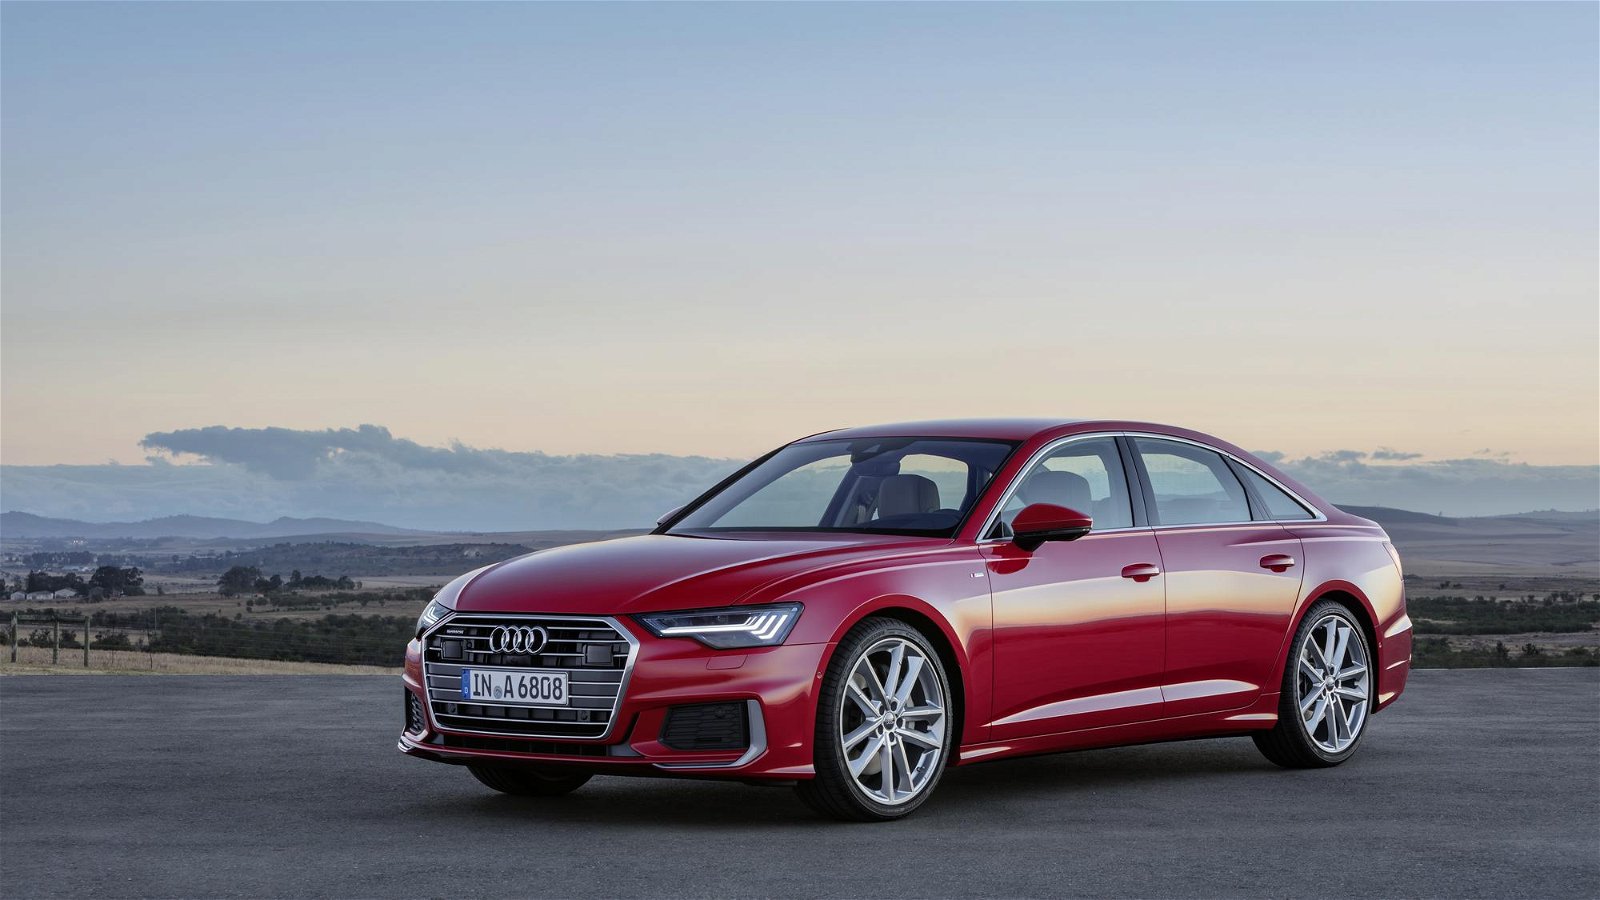 2019 Audi A6 C8 official pictures 08